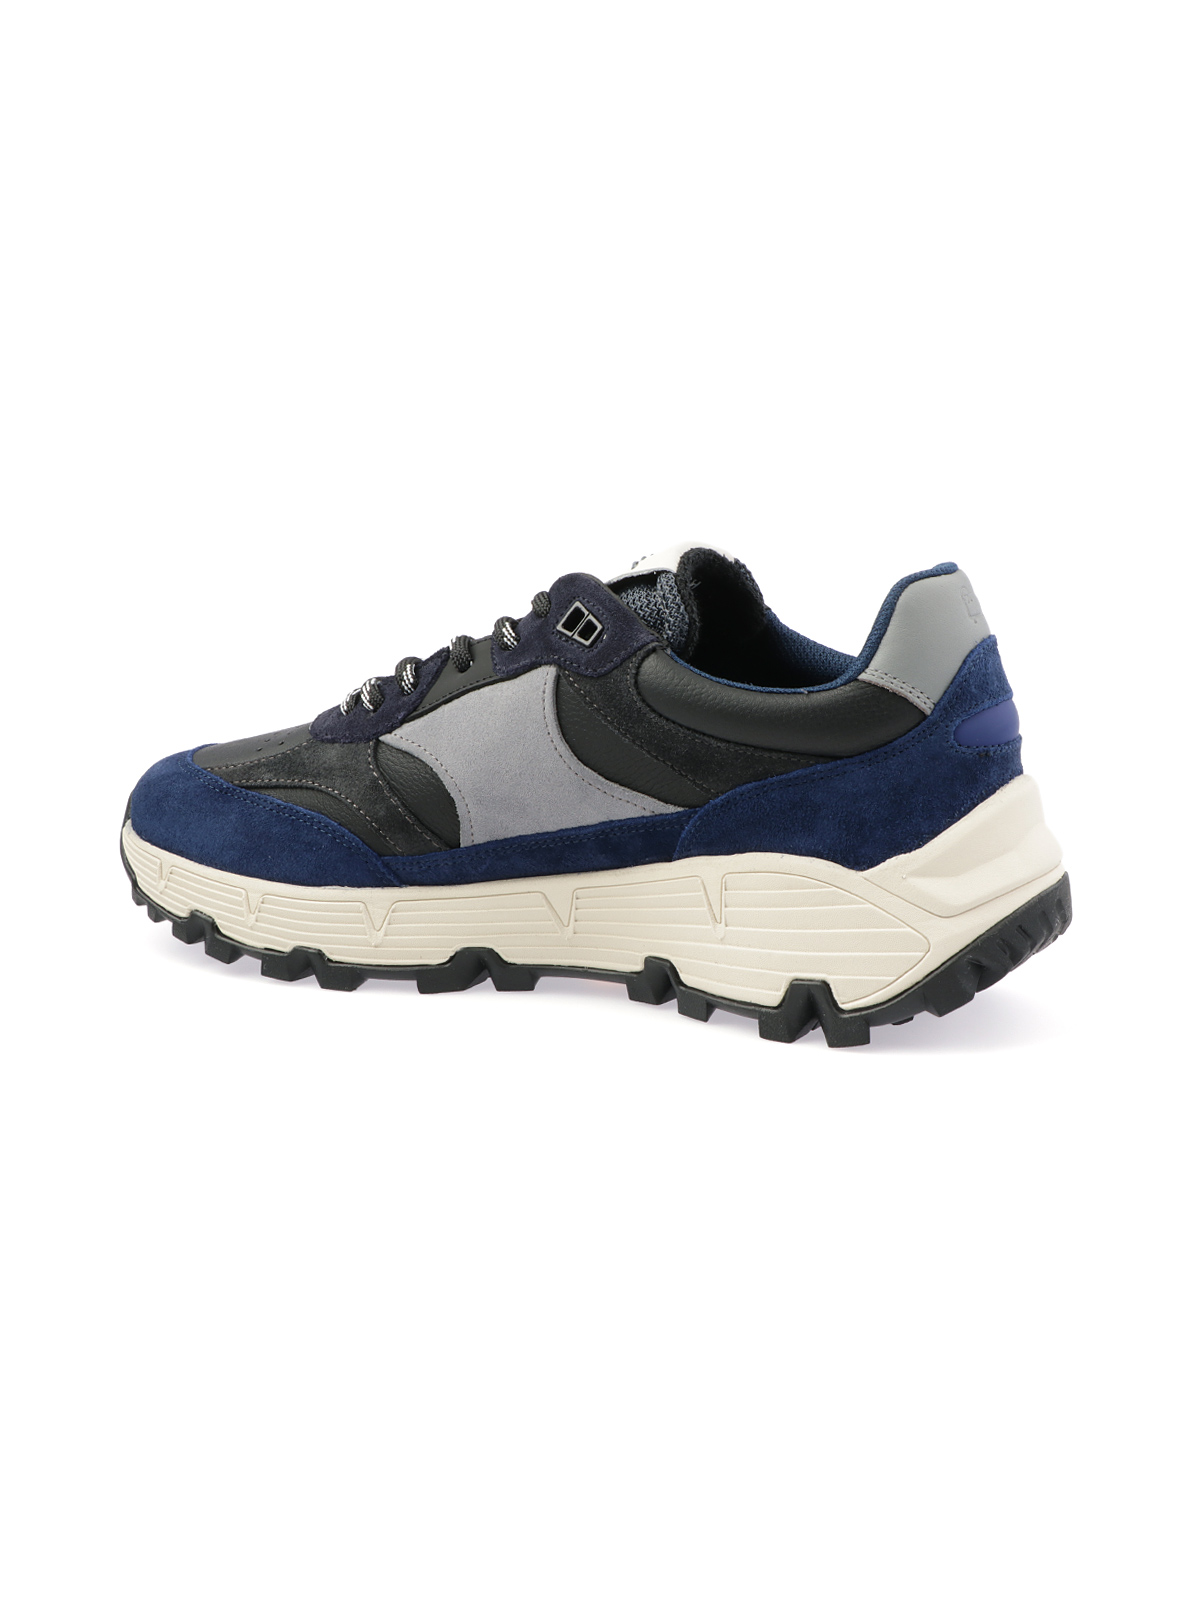 Picture of WOOLRICH | Men's Classic Runner Calf Trainers